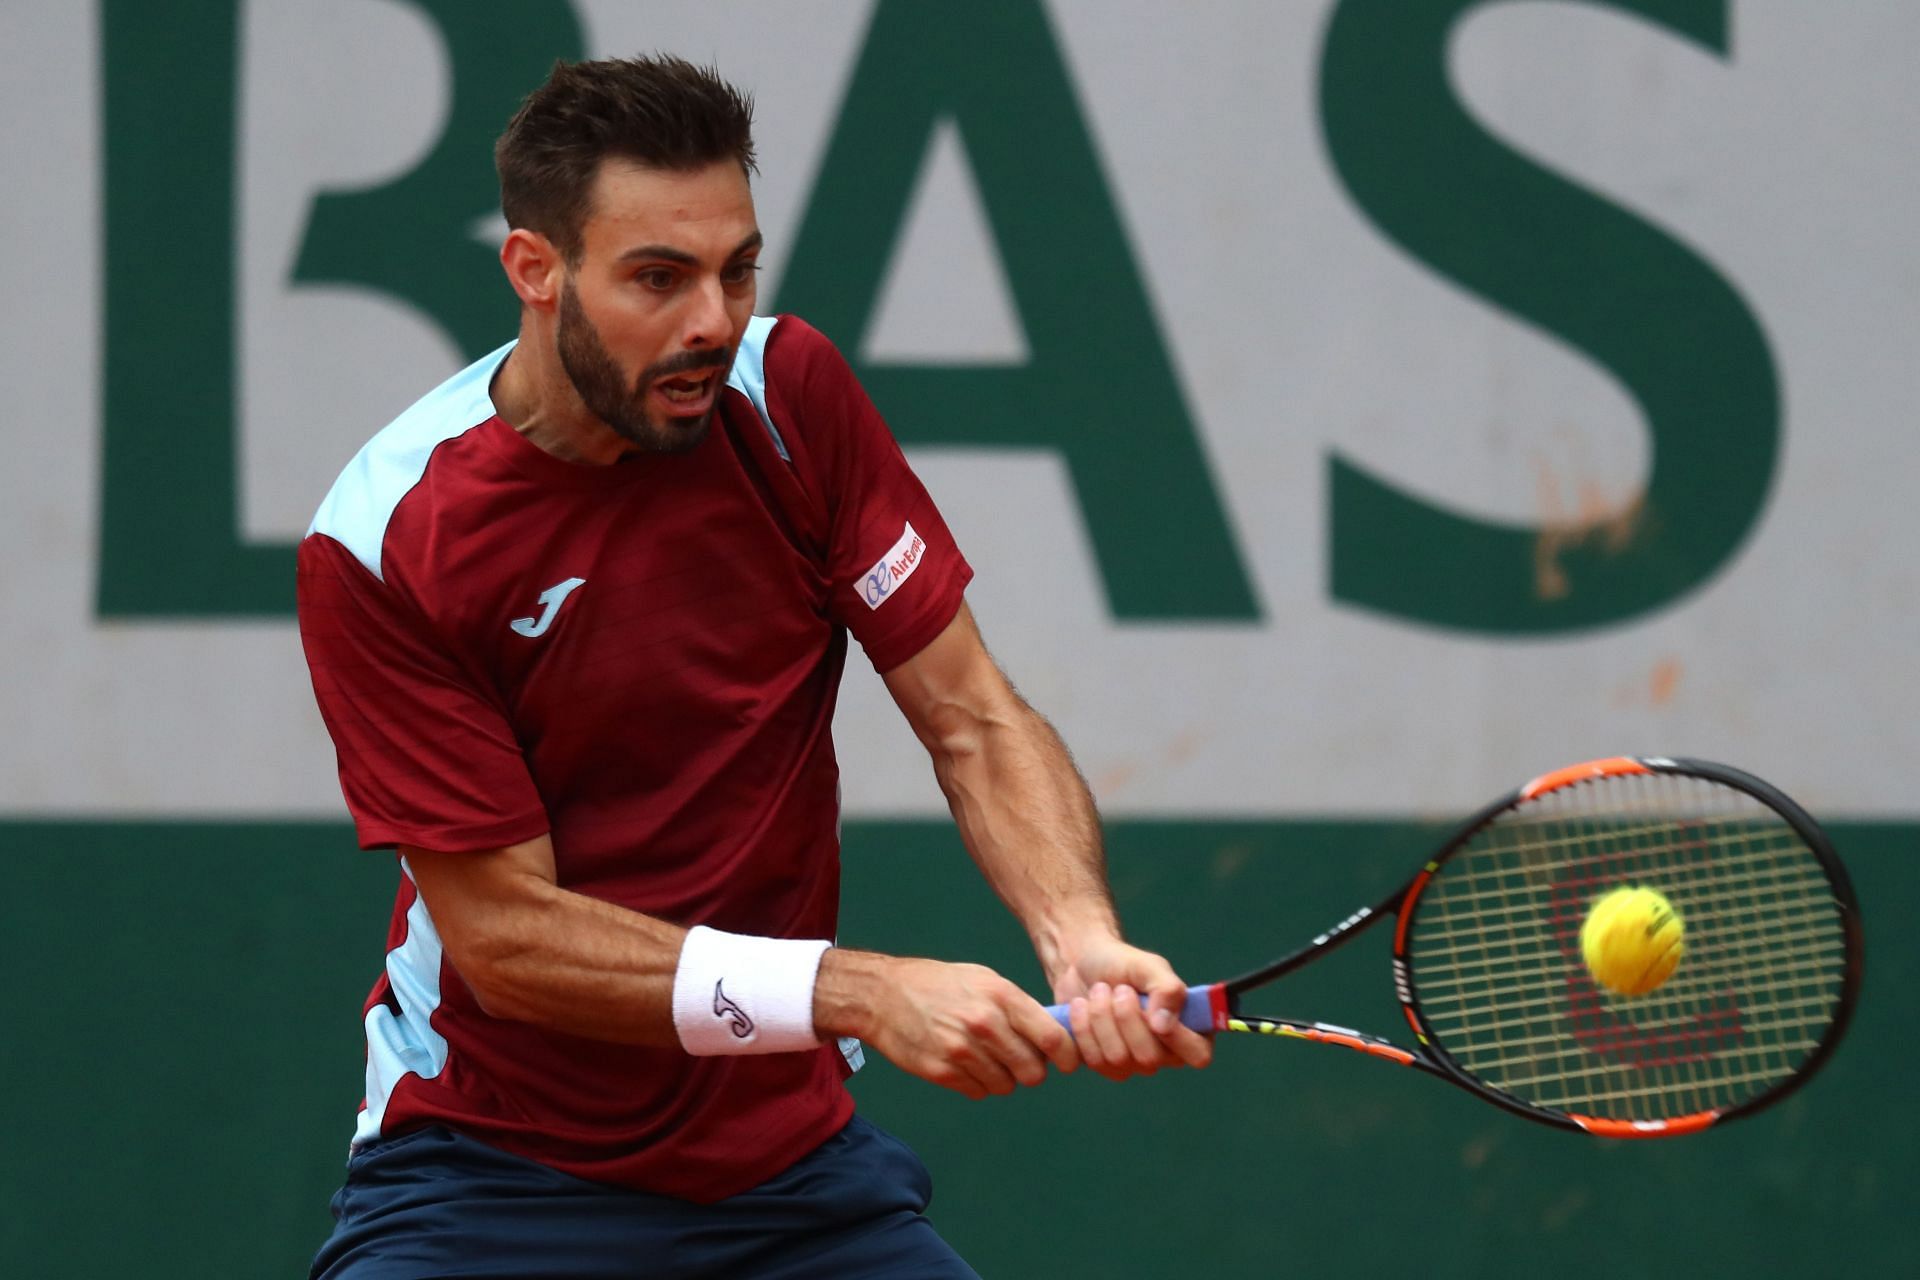 Marcel Granollers enjoyed a walkover from Rafael Nadal in the 2016 Roland Garros third round.